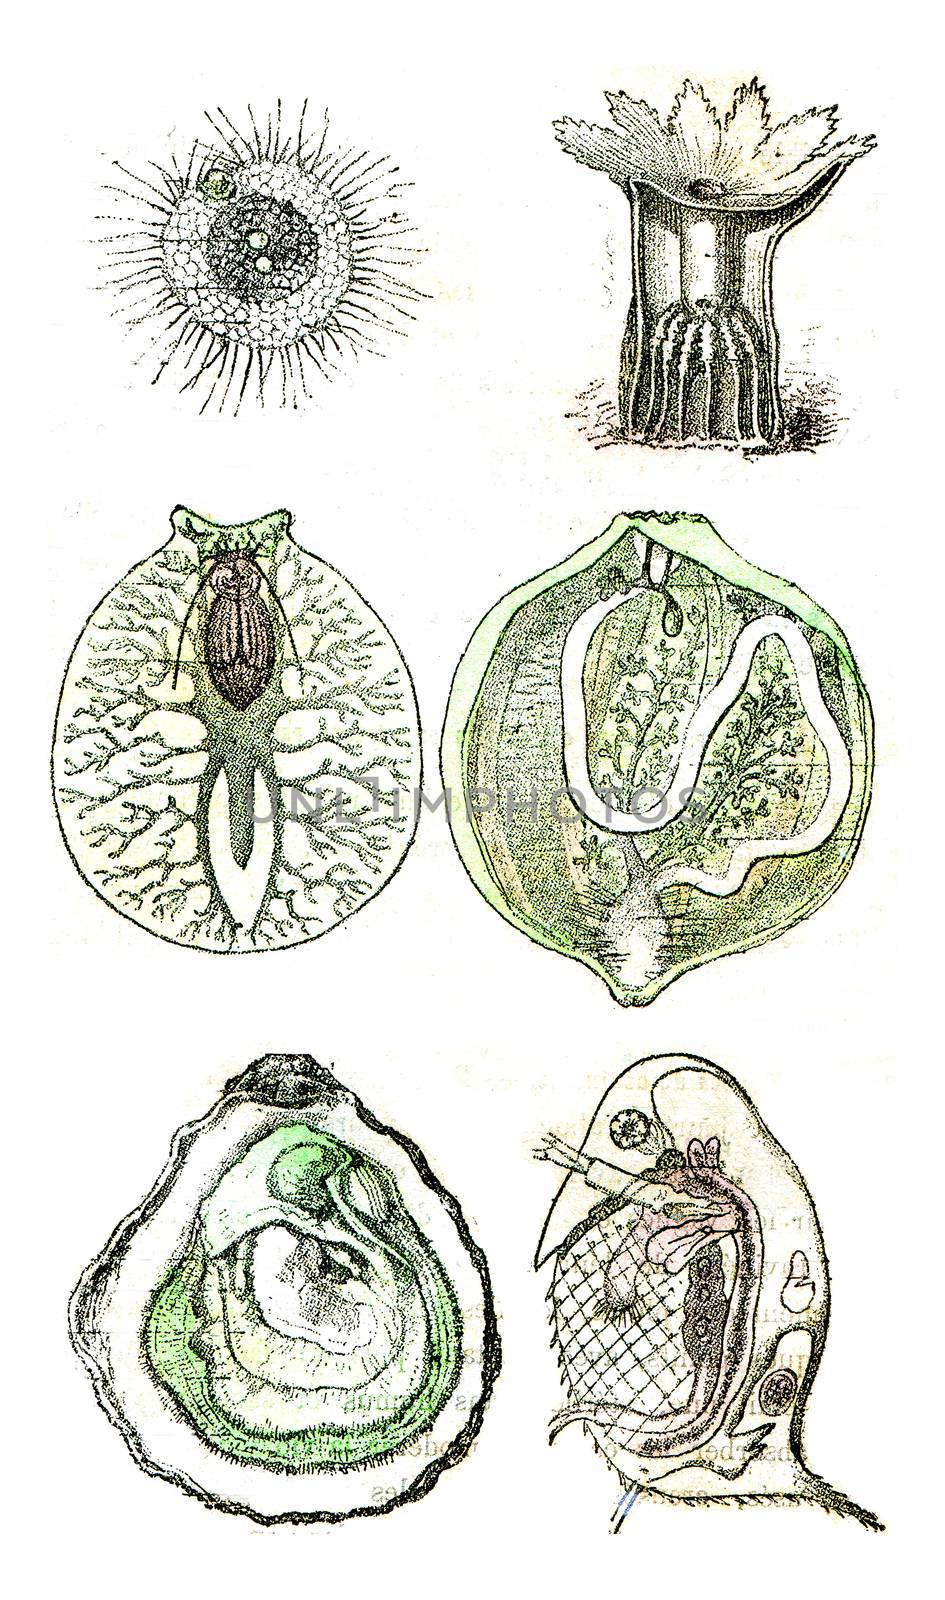 Comparative organization of invertebrate animals currently alive by Morphart